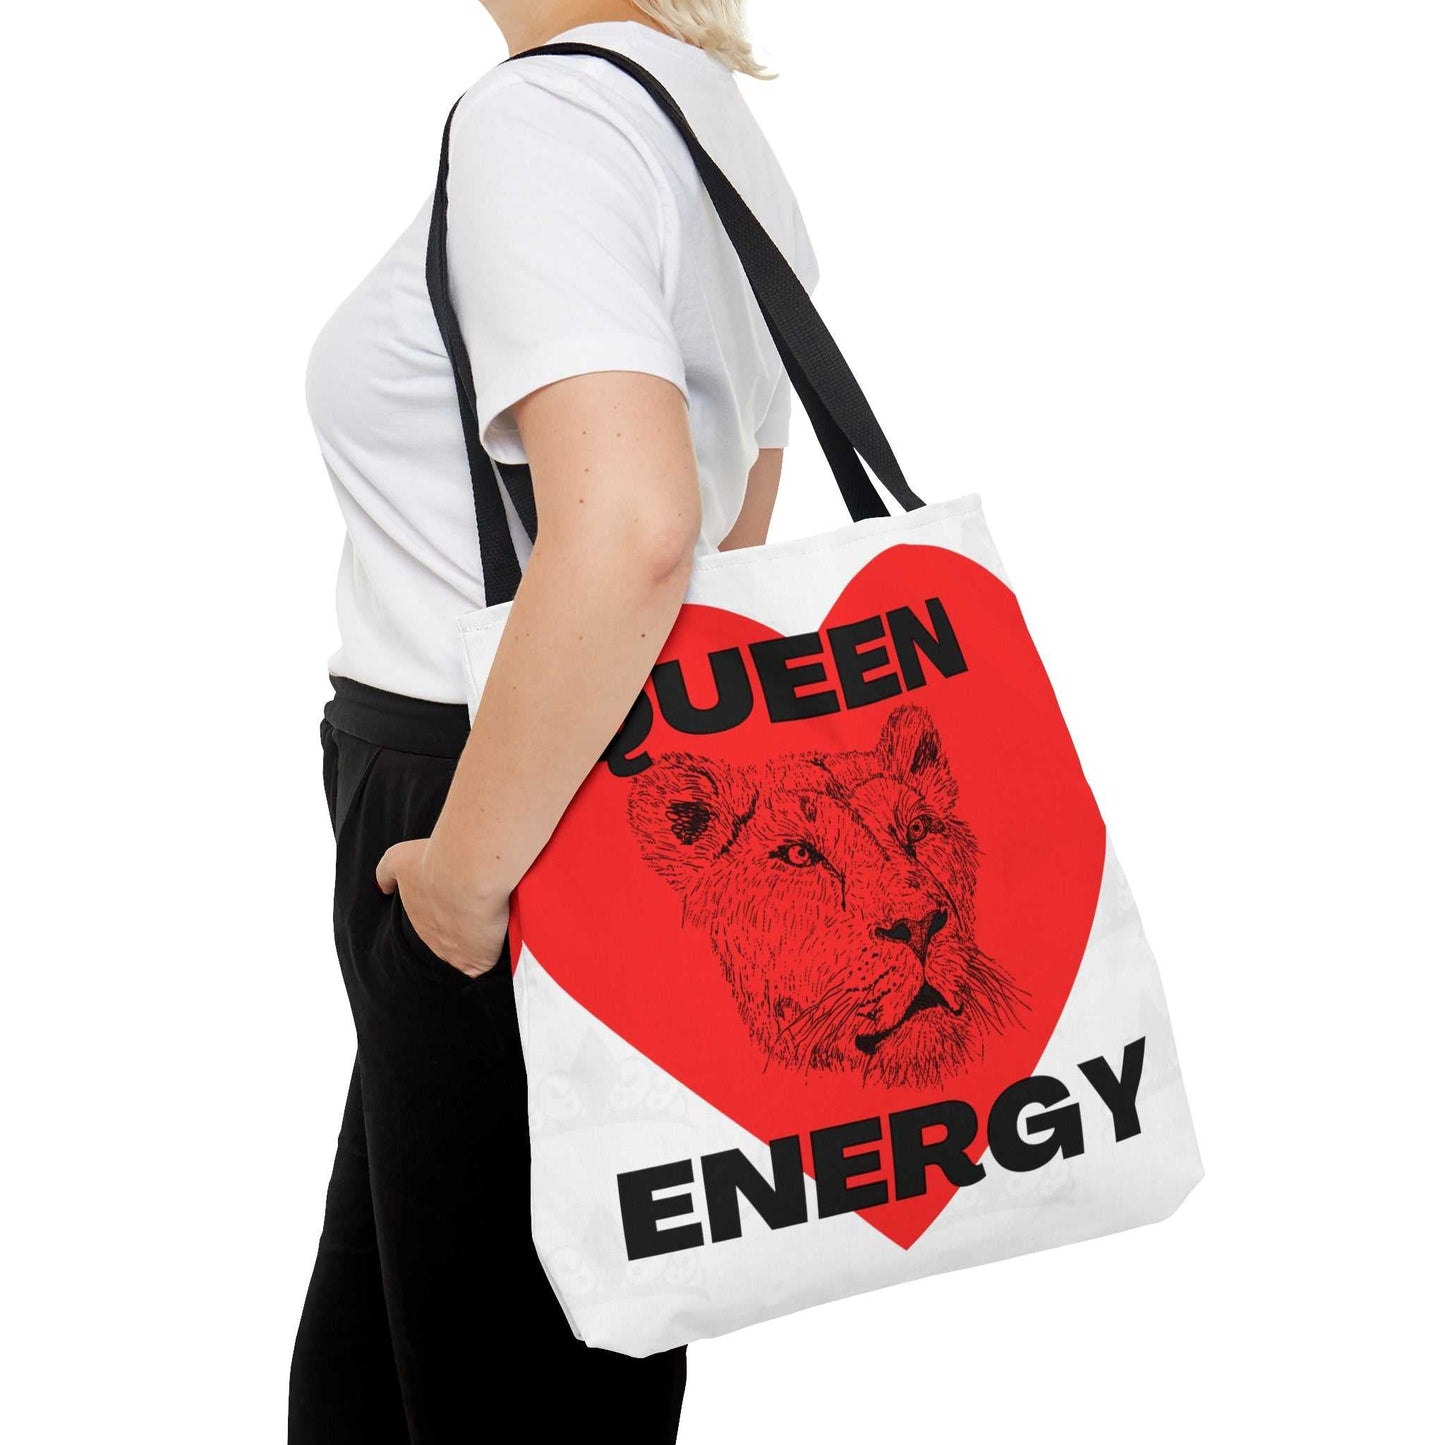 Queen Energy Tote Bag (AOP) Motivation on the Go!! Bags Good Vibes Daily Lab 30